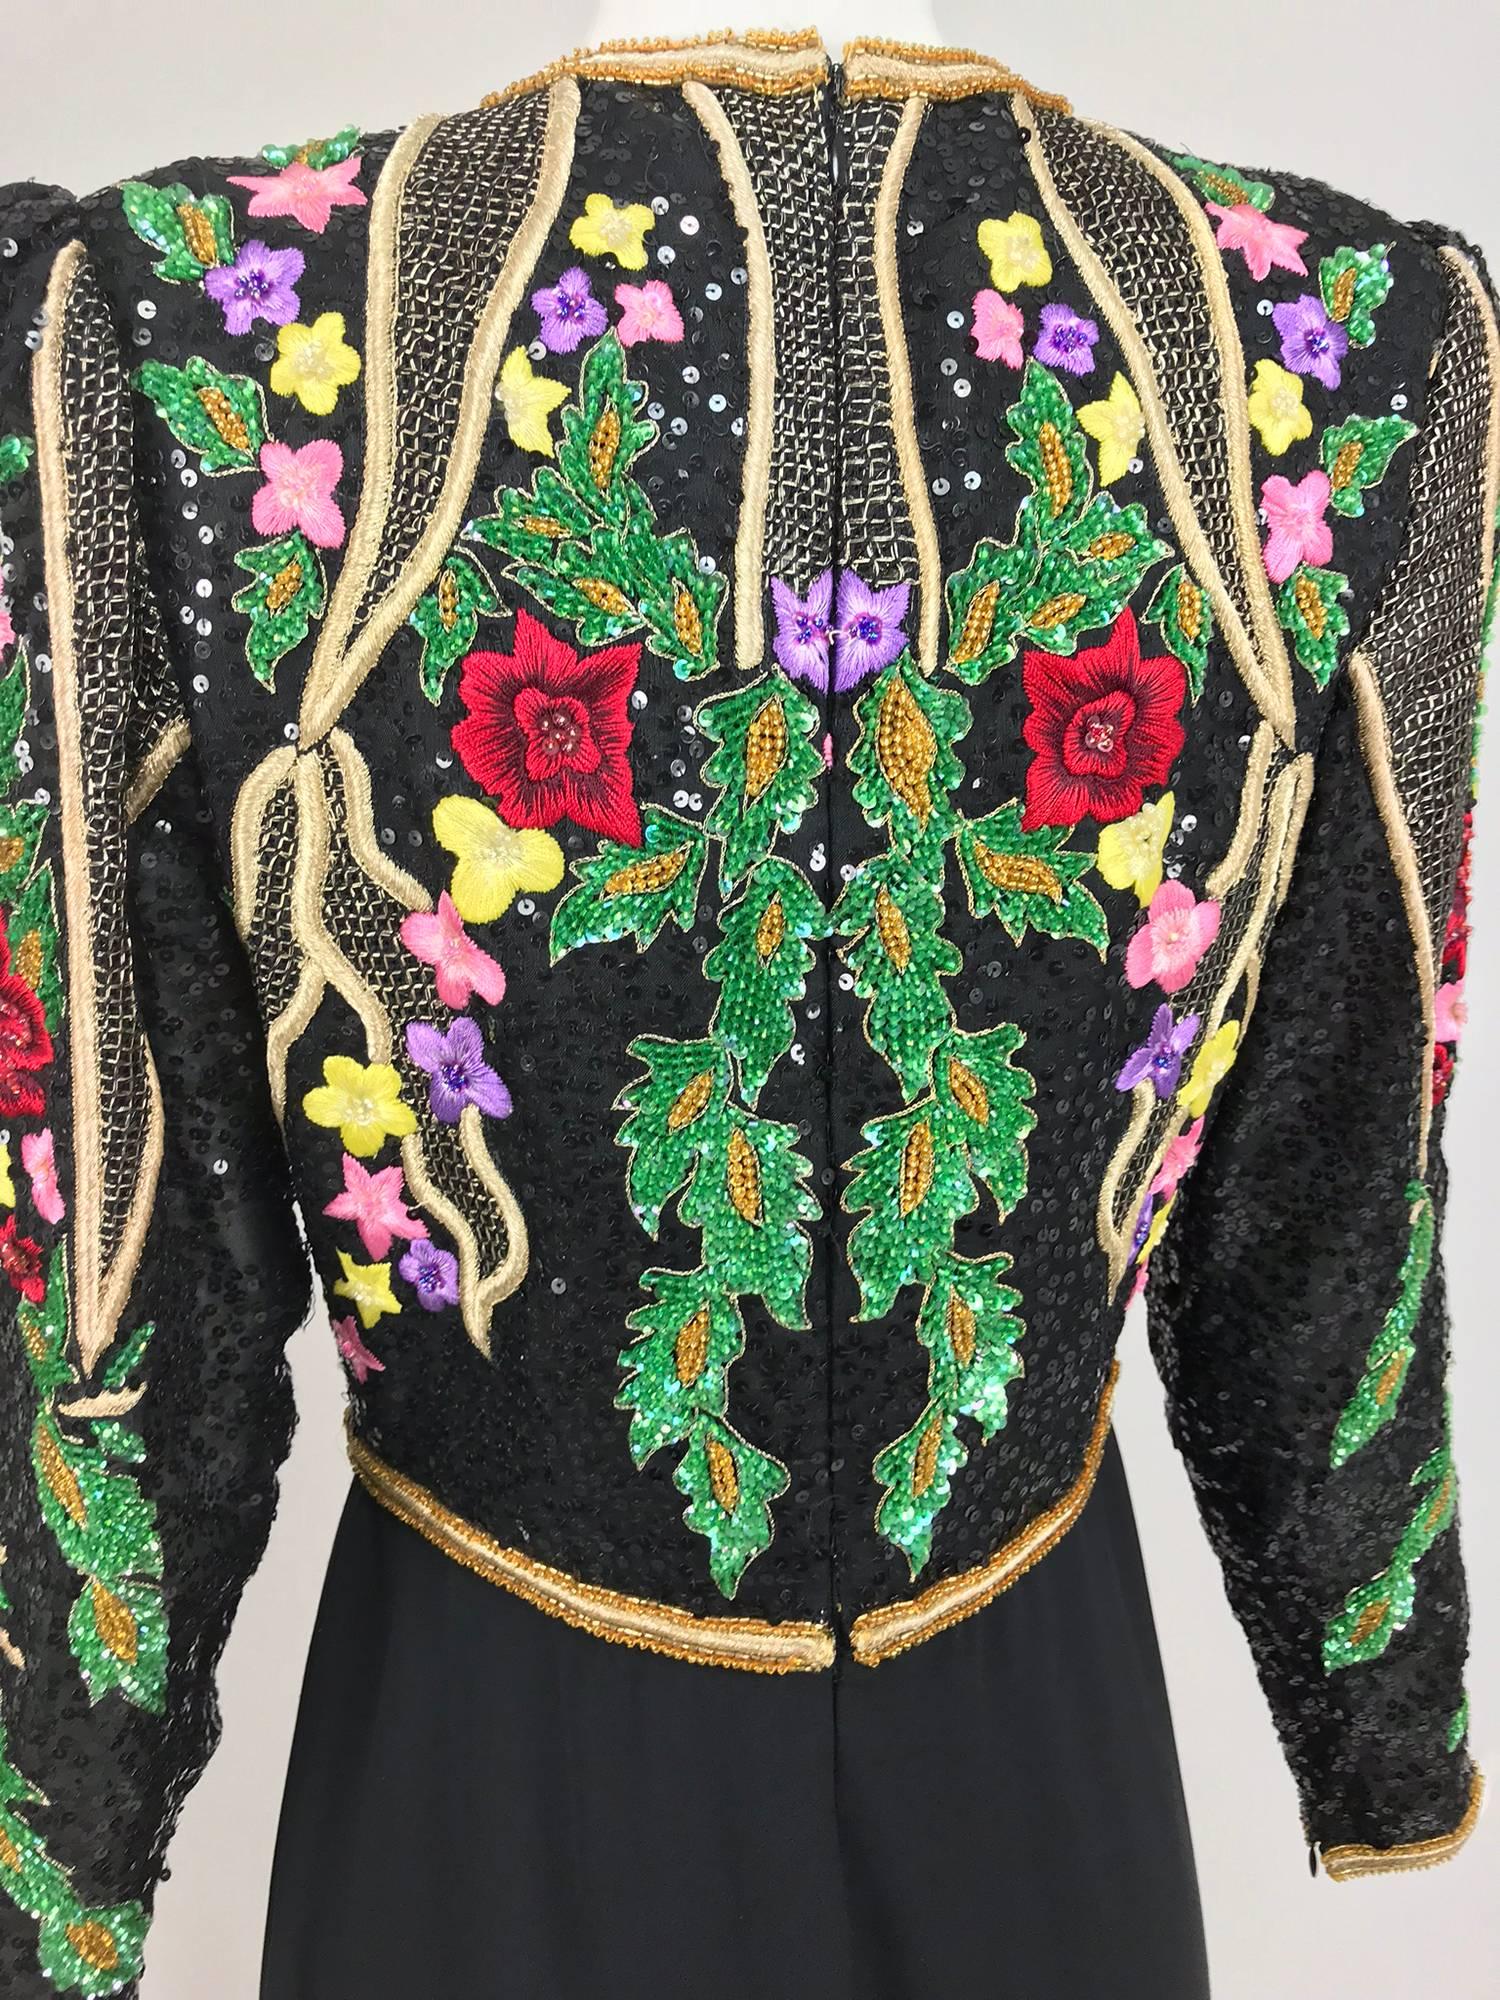 Richilene beaded and embroidered bodice evening dress...The embroidery and beading on this dress is pretty spectacular, the colours are amazing!  Jewel neckline bodice has long sleeves, the shoulders are slightly peaked, the facings and waist band